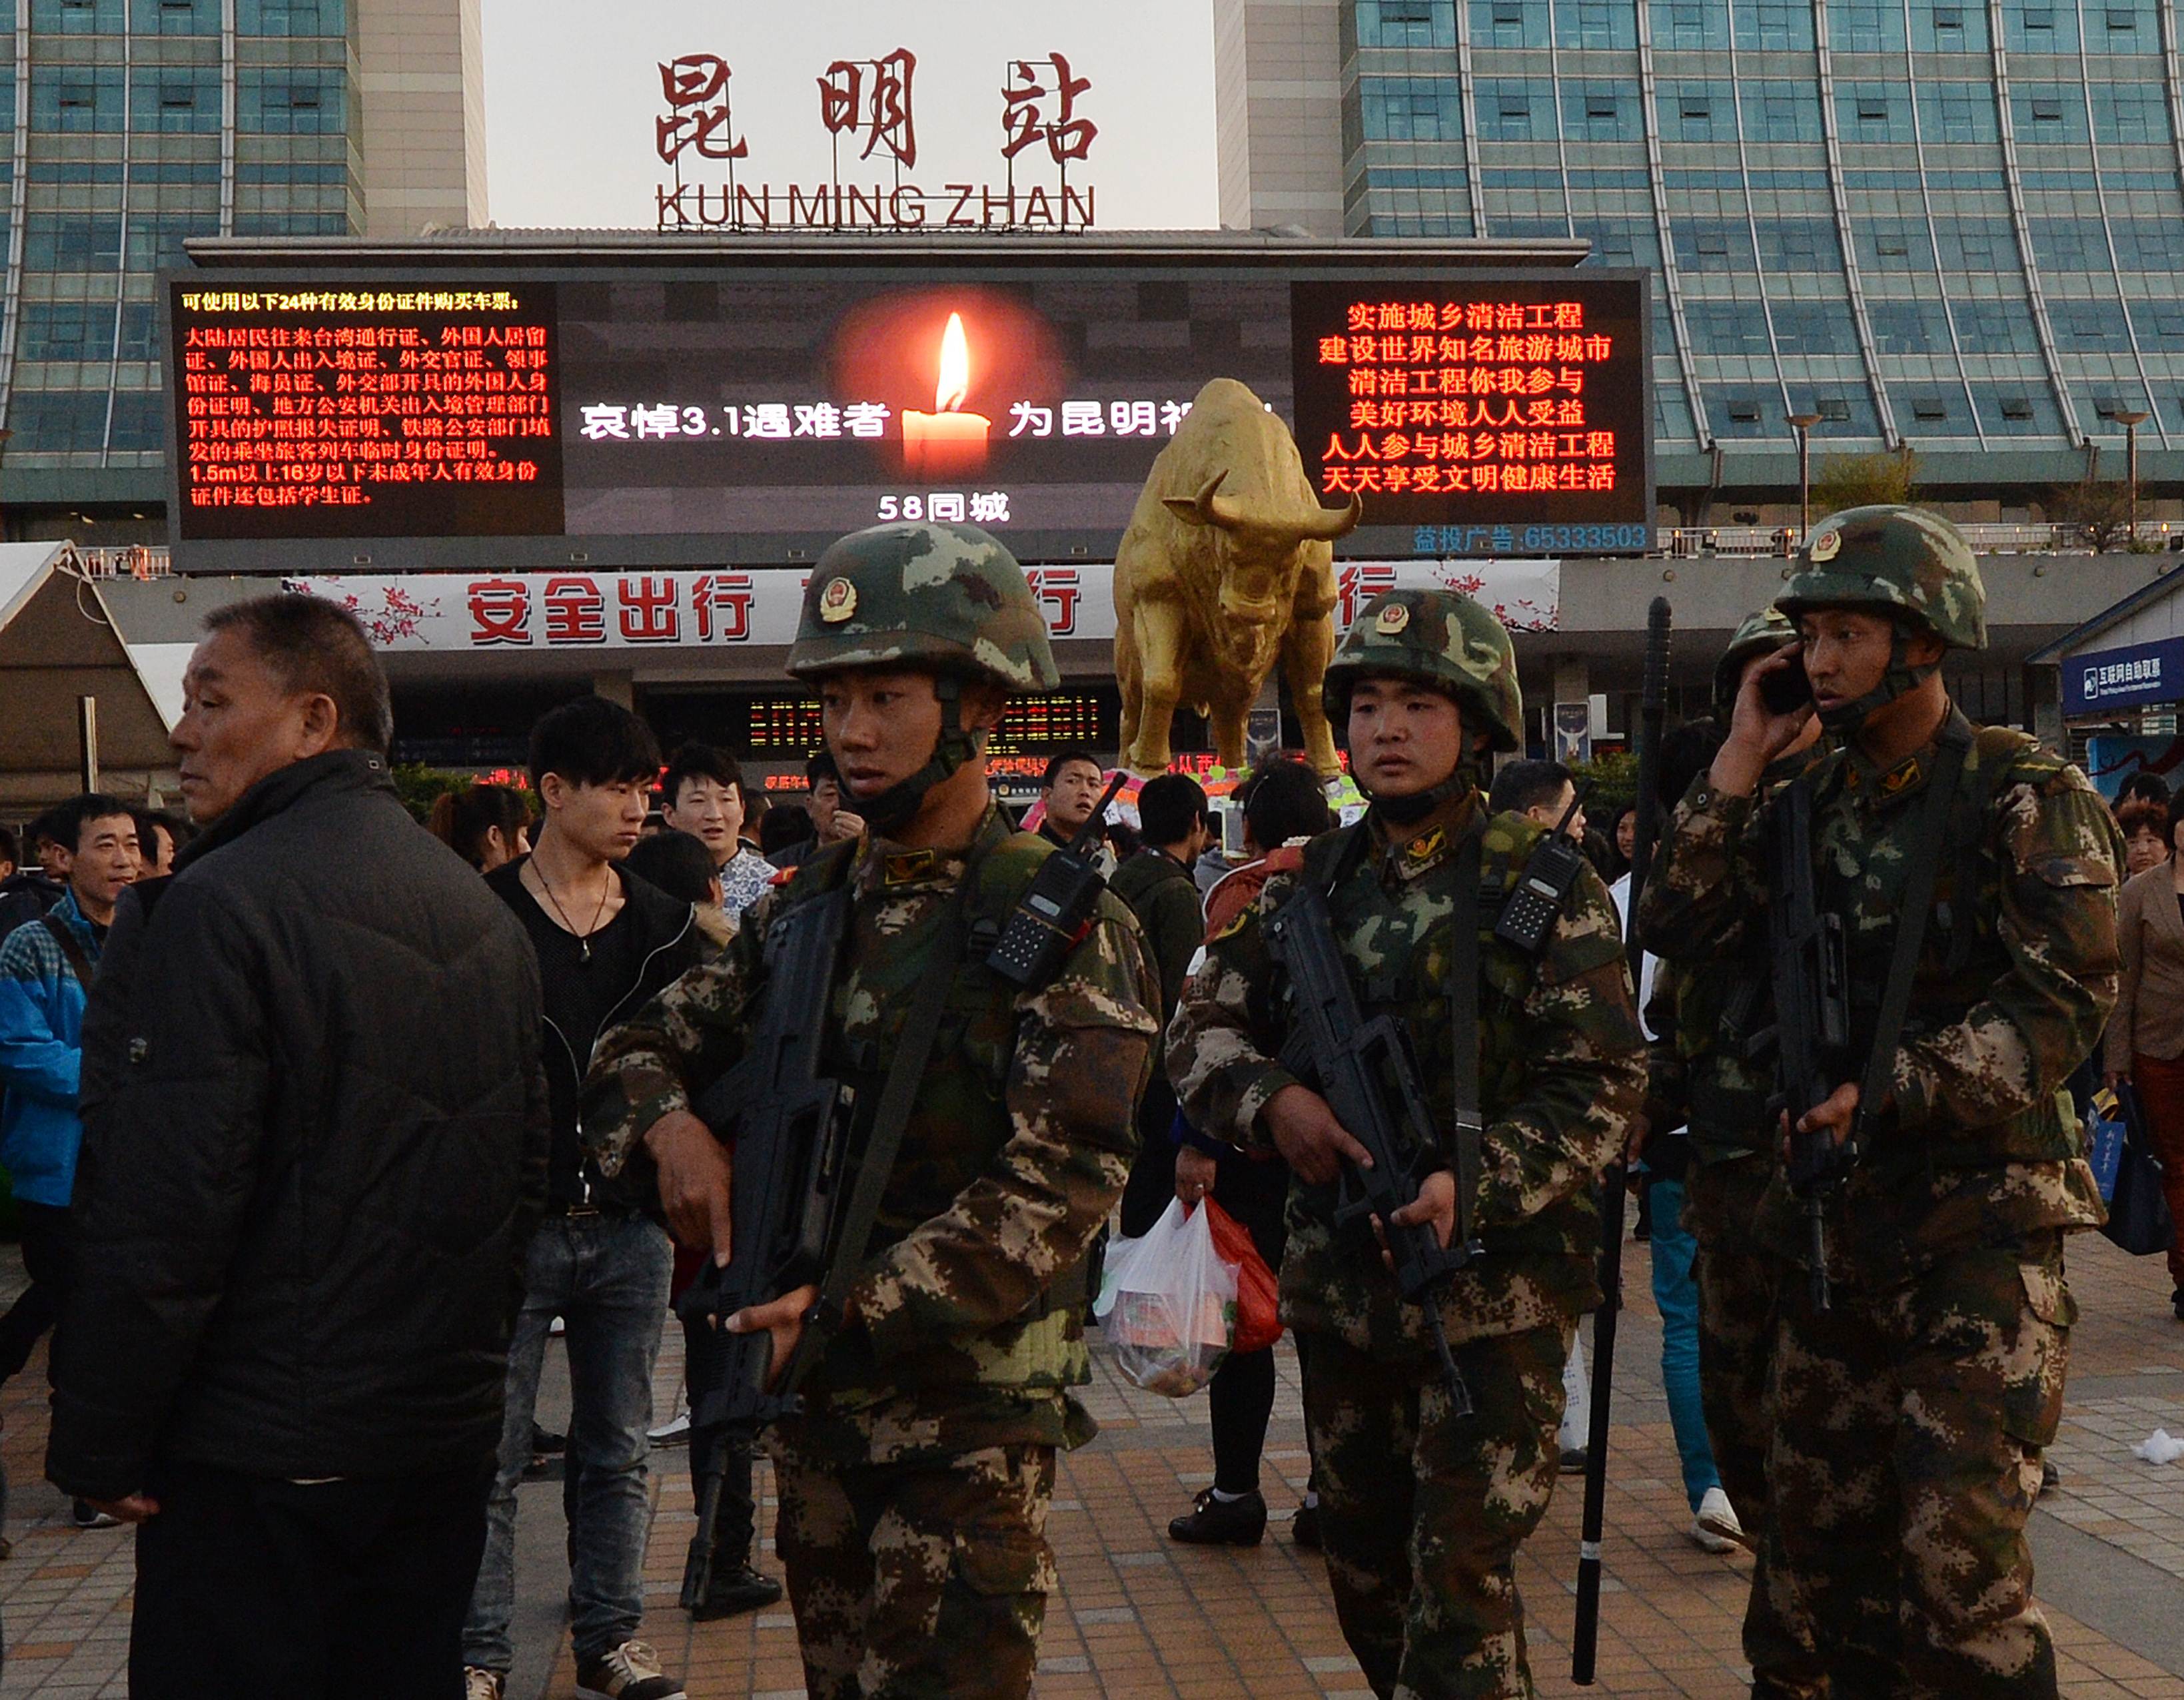 Chinese paramilitary police patrol outside the scene of the attack at the main train station in Kunming, Yunnan Province, on March 3, 2014. Photo: AFP